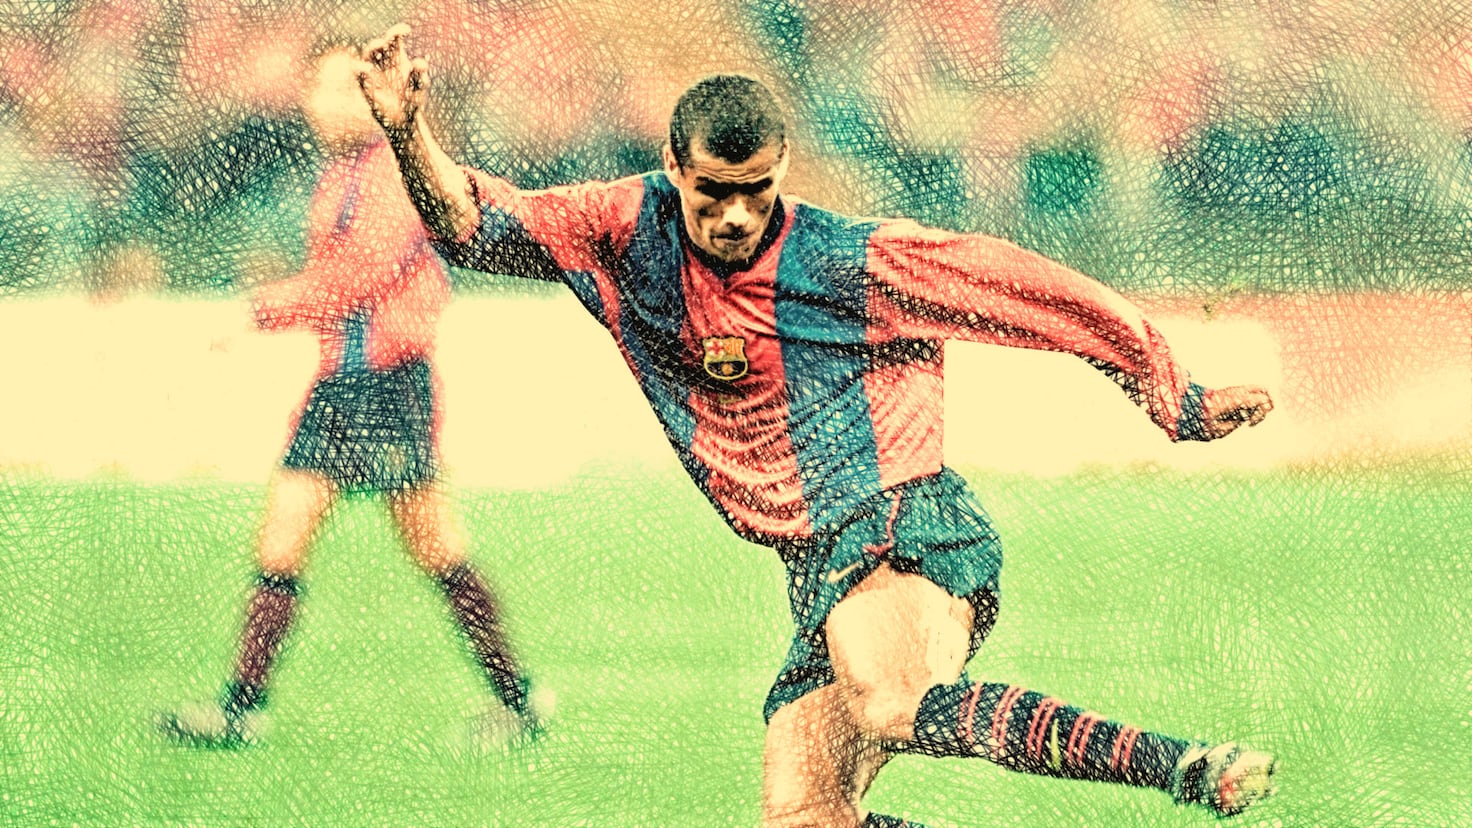 A Canvas of Goals: Rivaldo's Meteoric Rise at FC Barcelona